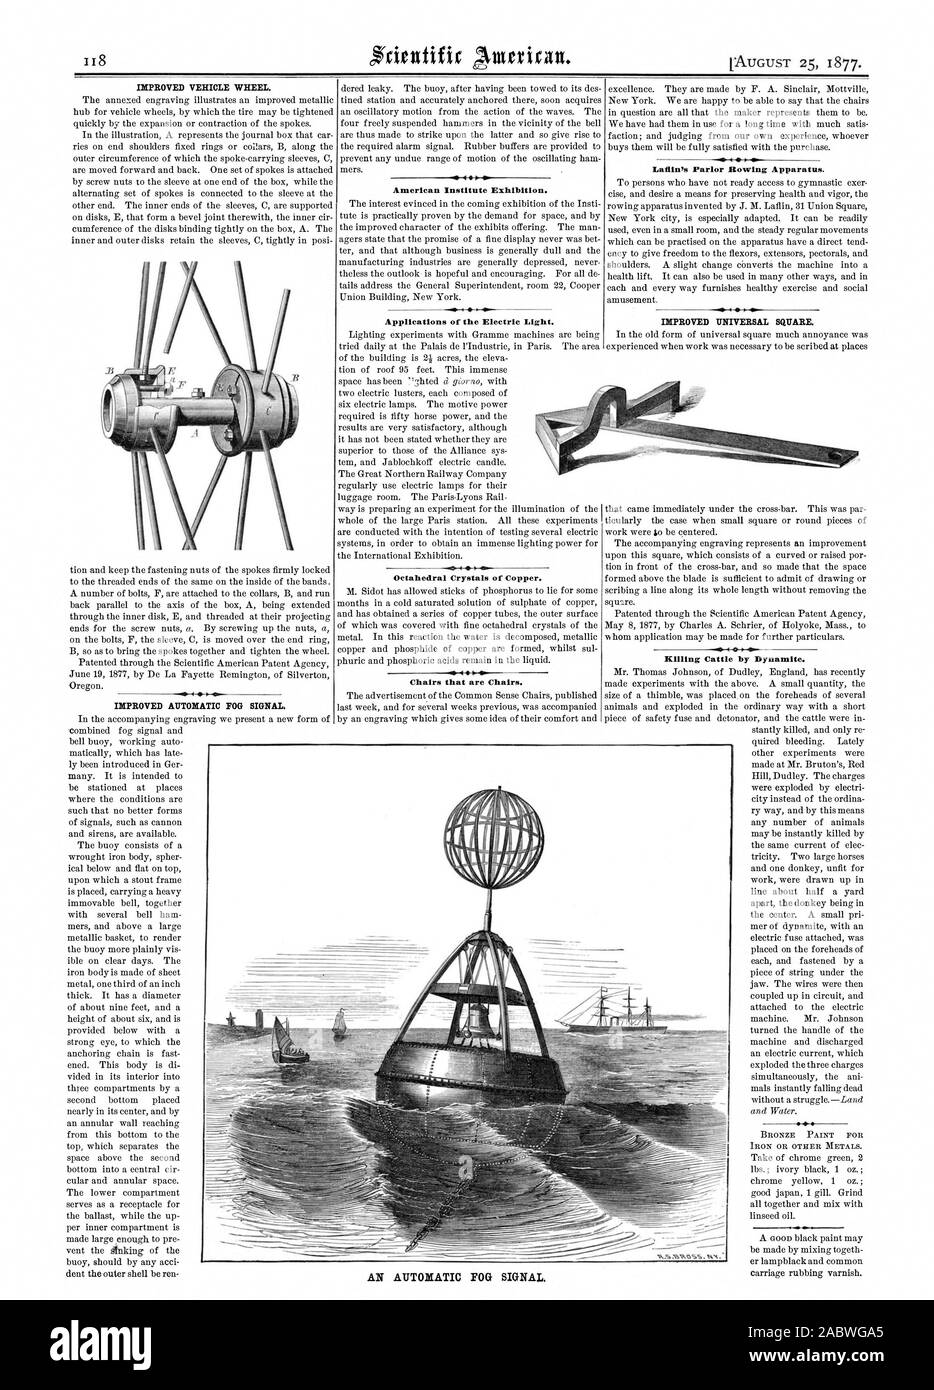 IMPROVED VEHICLE WHEEL. IMPROVED AUTOMATIC FOG SIGNAL. It 1 American Institute Exhibition. Applications of the Electric Light. Octahedral Crystals of Copper. Im Chairs that are Chairs. LadinIs Parlor Rowing Apparatus. I  IMPROVED UNIVERSAL SQUARE. Killing Cattle by Dynamite. BRONZE PAINT FOR IRON OR OTHER METALS. AN AUTOMATIC FOG SIGNAL, scientific american, 1877-08-25 Stock Photo